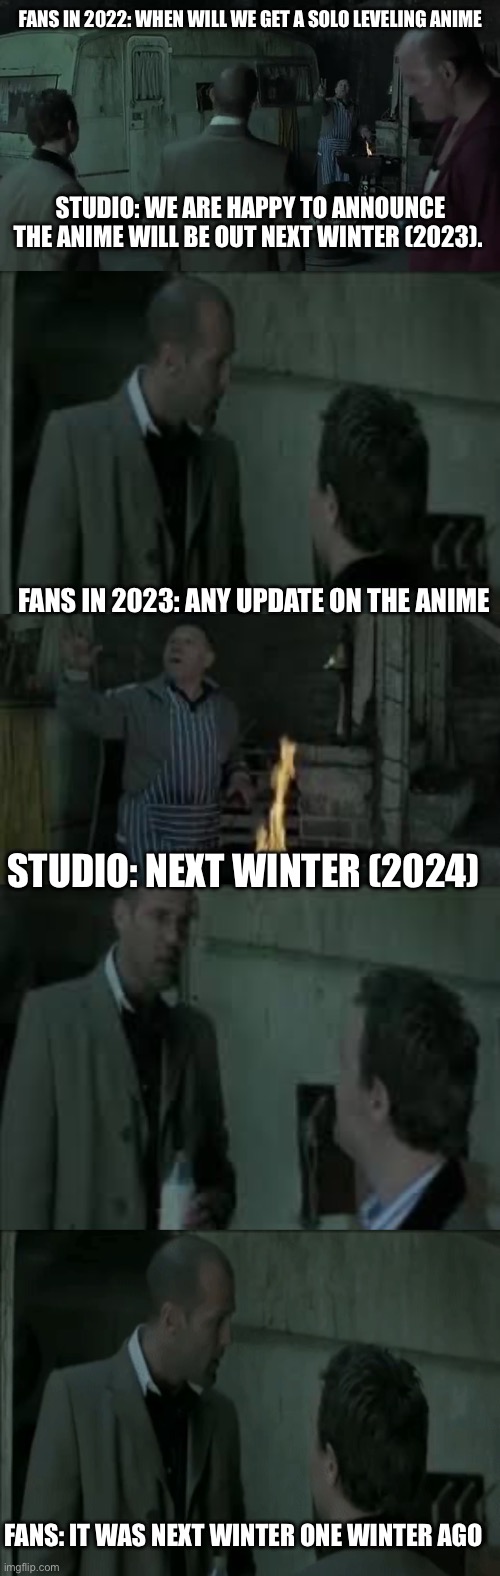 Solo leveling announcement | FANS IN 2022: WHEN WILL WE GET A SOLO LEVELING ANIME; STUDIO: WE ARE HAPPY TO ANNOUNCE THE ANIME WILL BE OUT NEXT WINTER (2023). FANS IN 2023: ANY UPDATE ON THE ANIME; STUDIO: NEXT WINTER (2024); FANS: IT WAS NEXT WINTER ONE WINTER AGO | image tagged in anime,anime meme | made w/ Imgflip meme maker